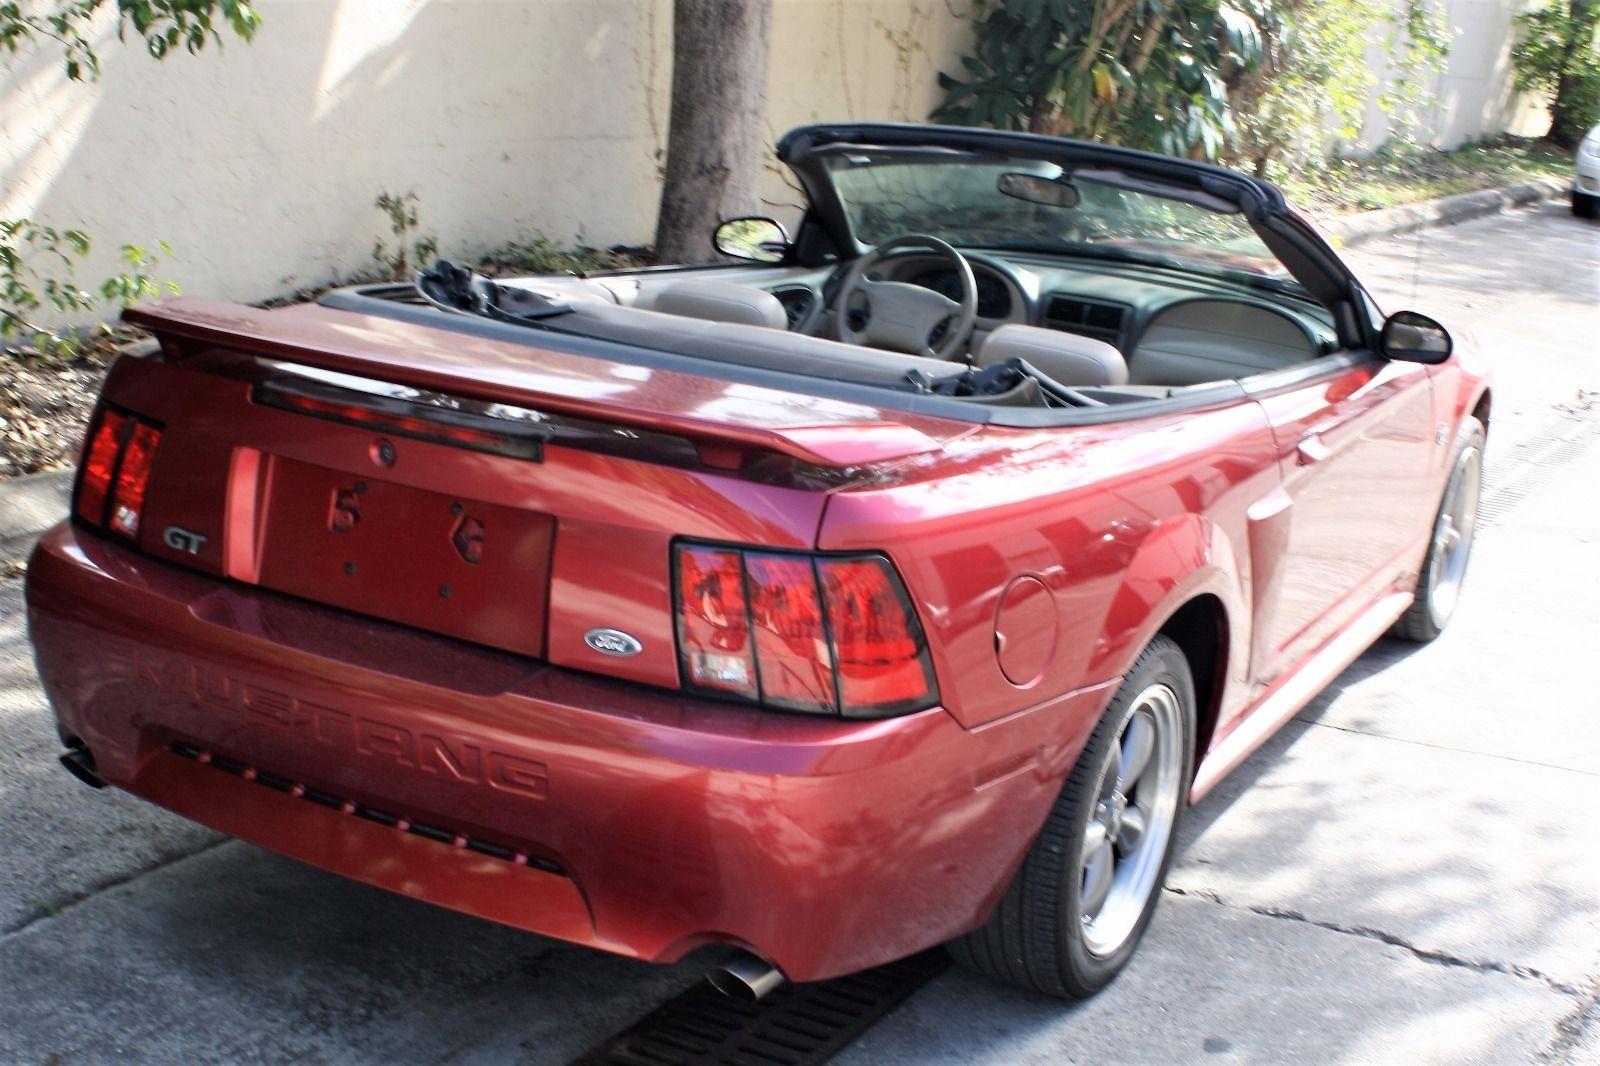 2003 Ford Mustang GT Convertible